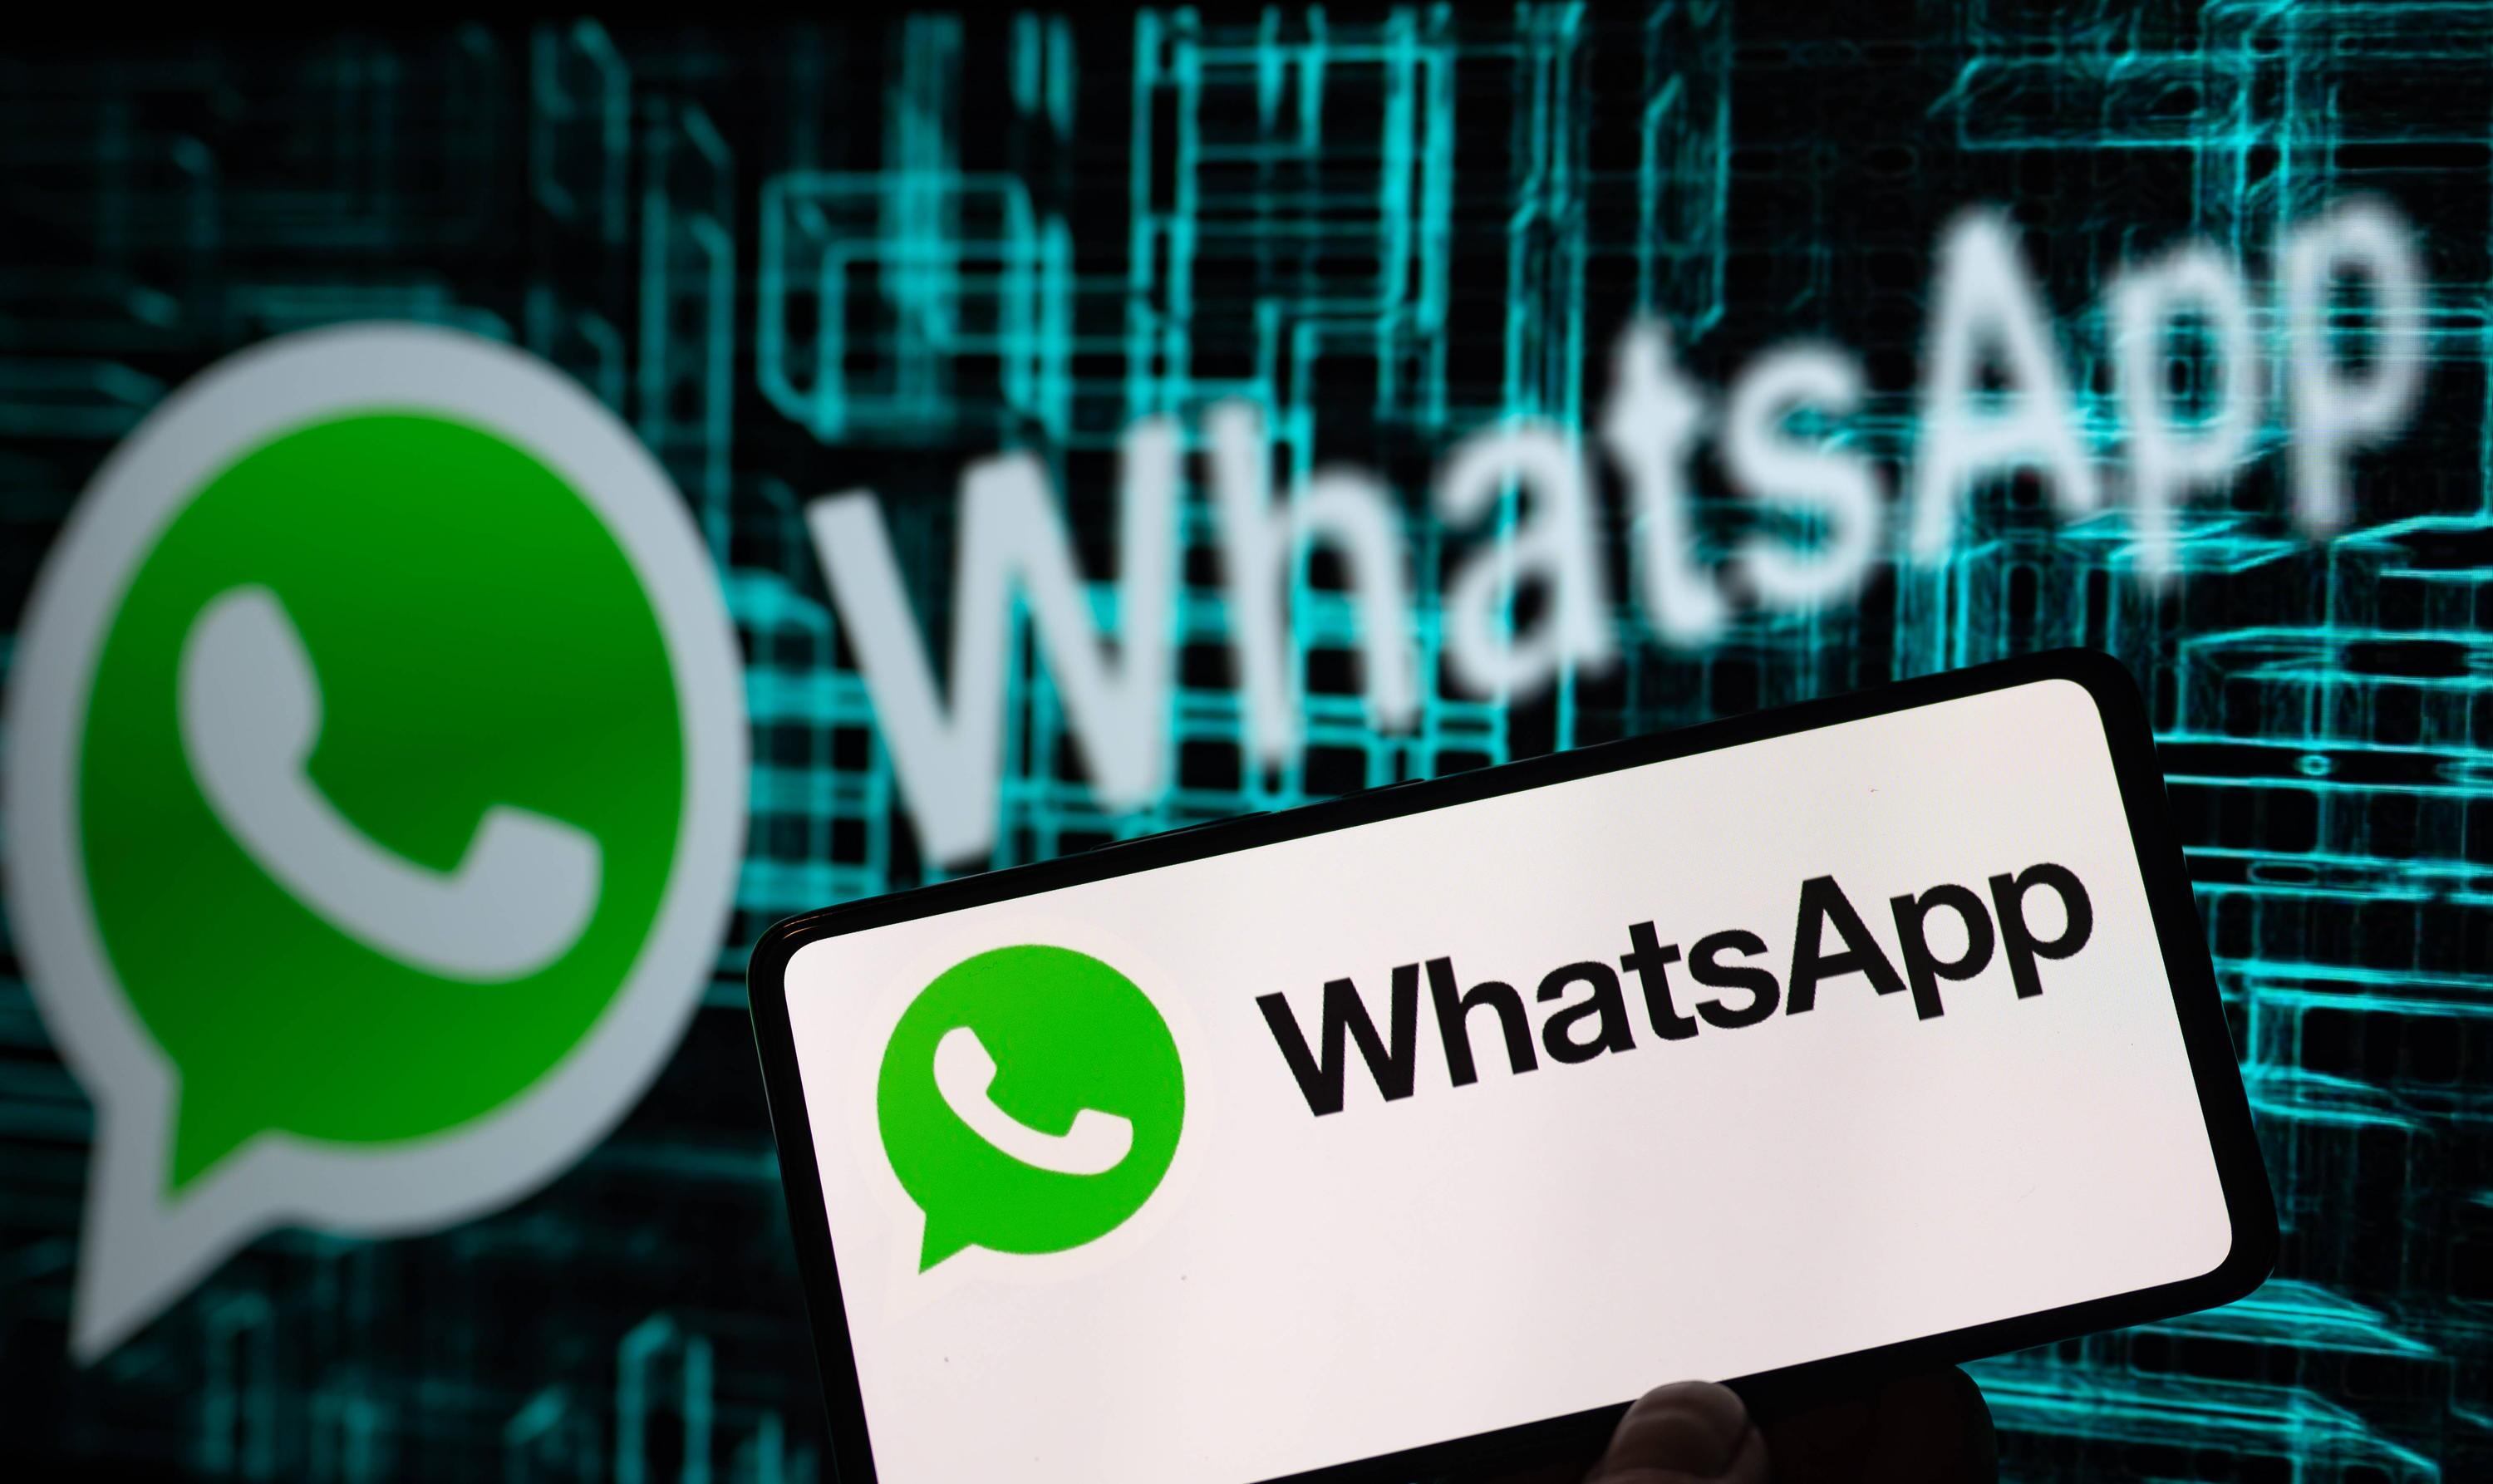 WhatsApp seeker filtering software find the customers you want